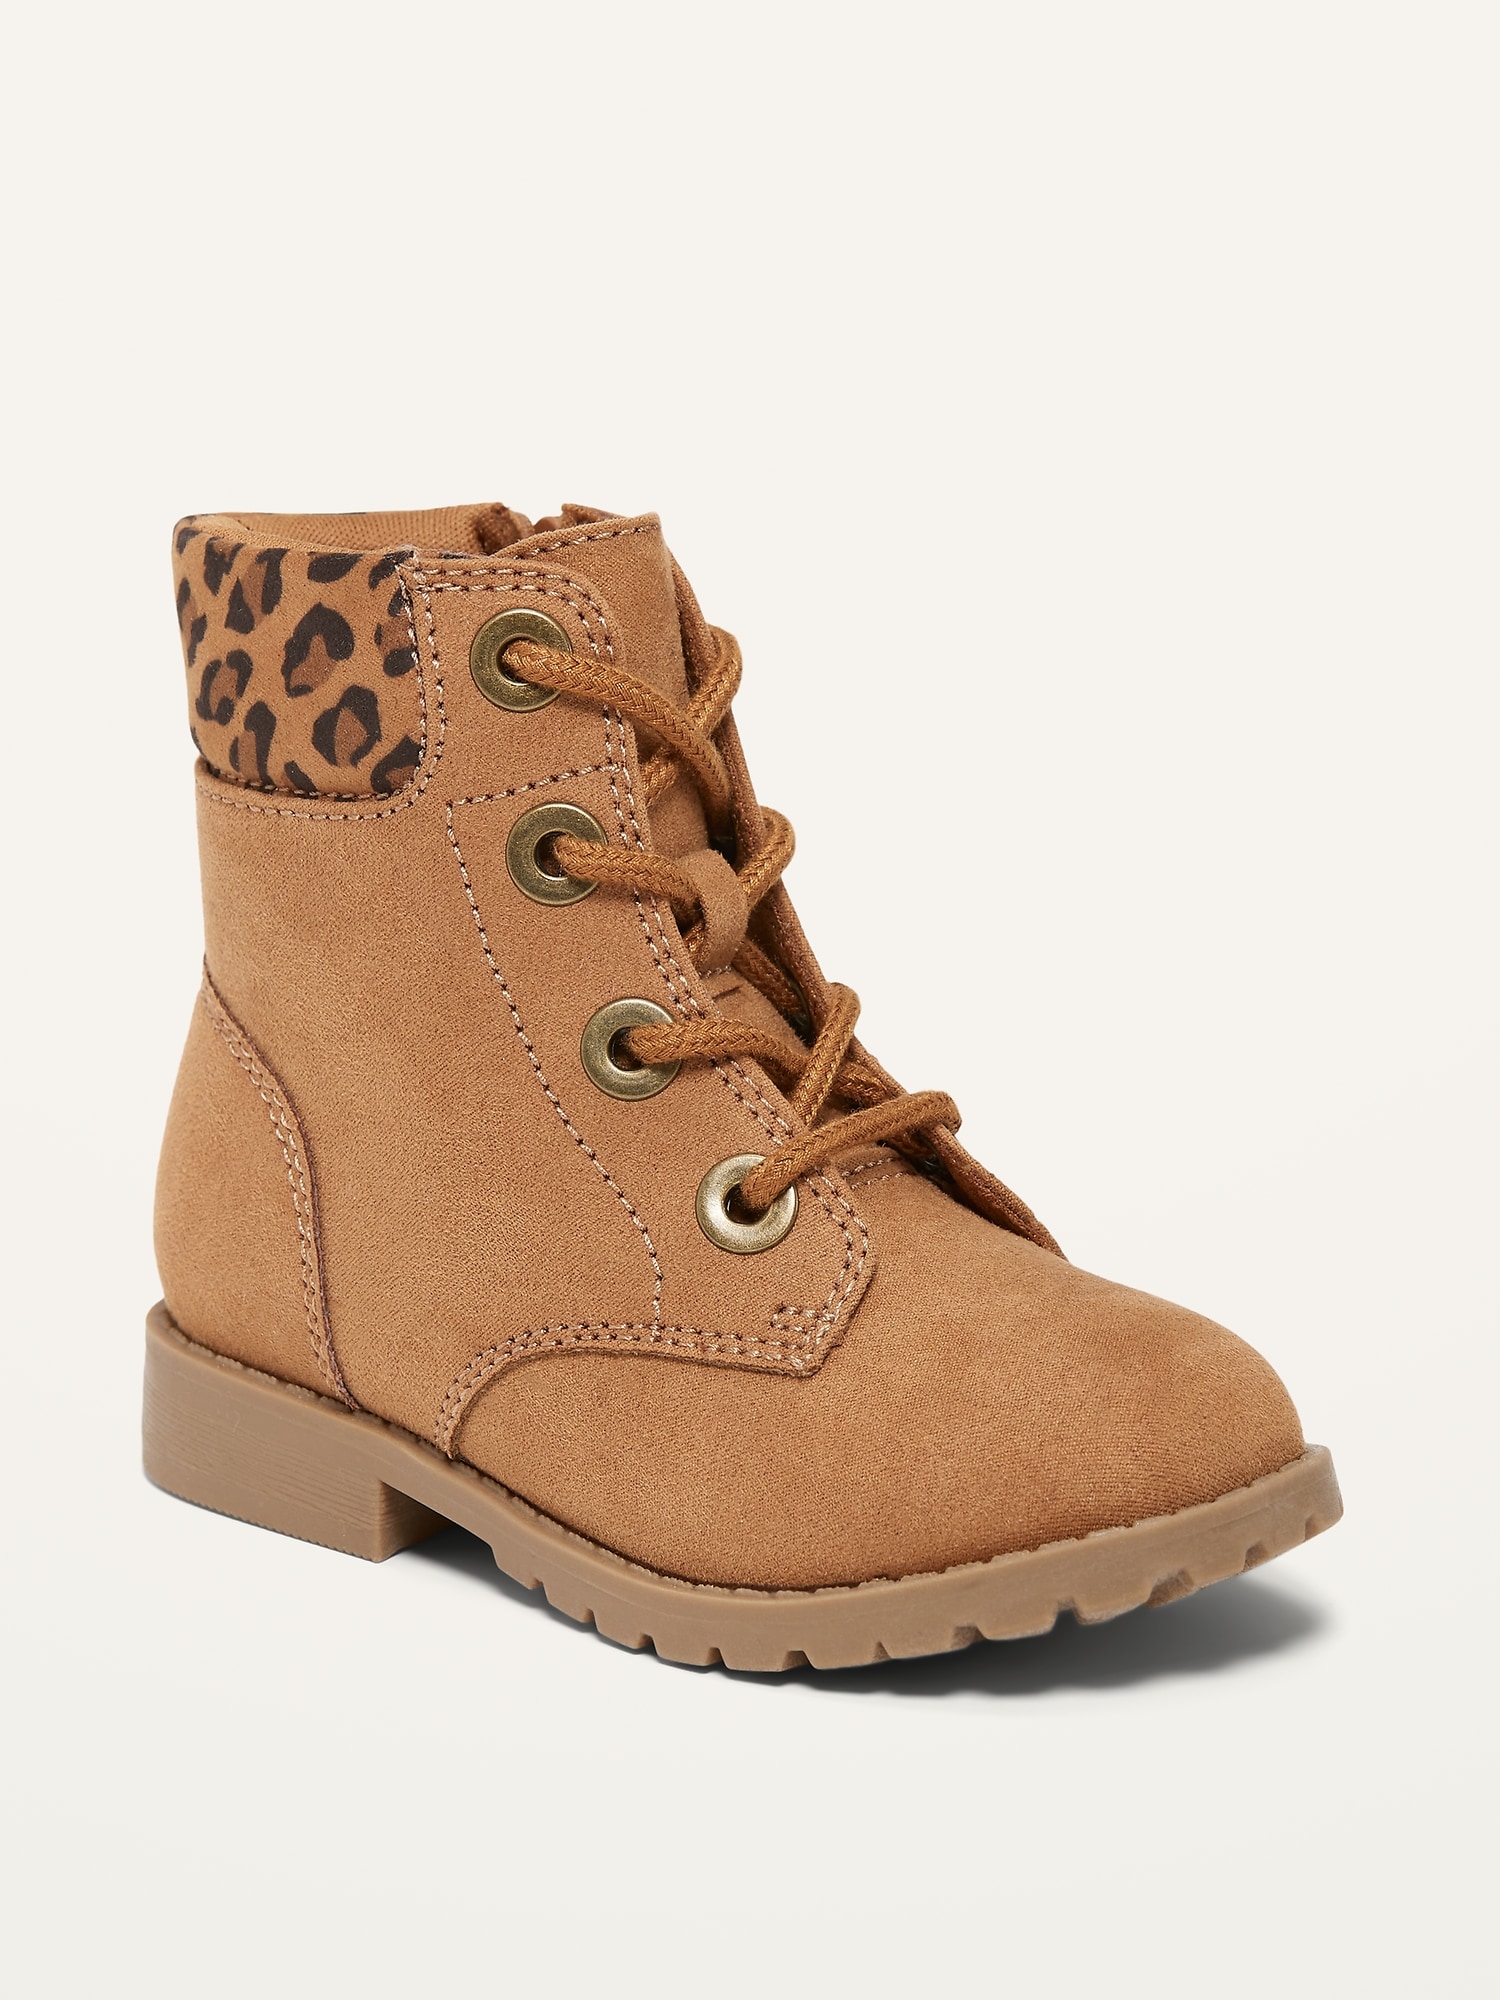 Faux-Suede Lace-Up Boots for Toddler Girls